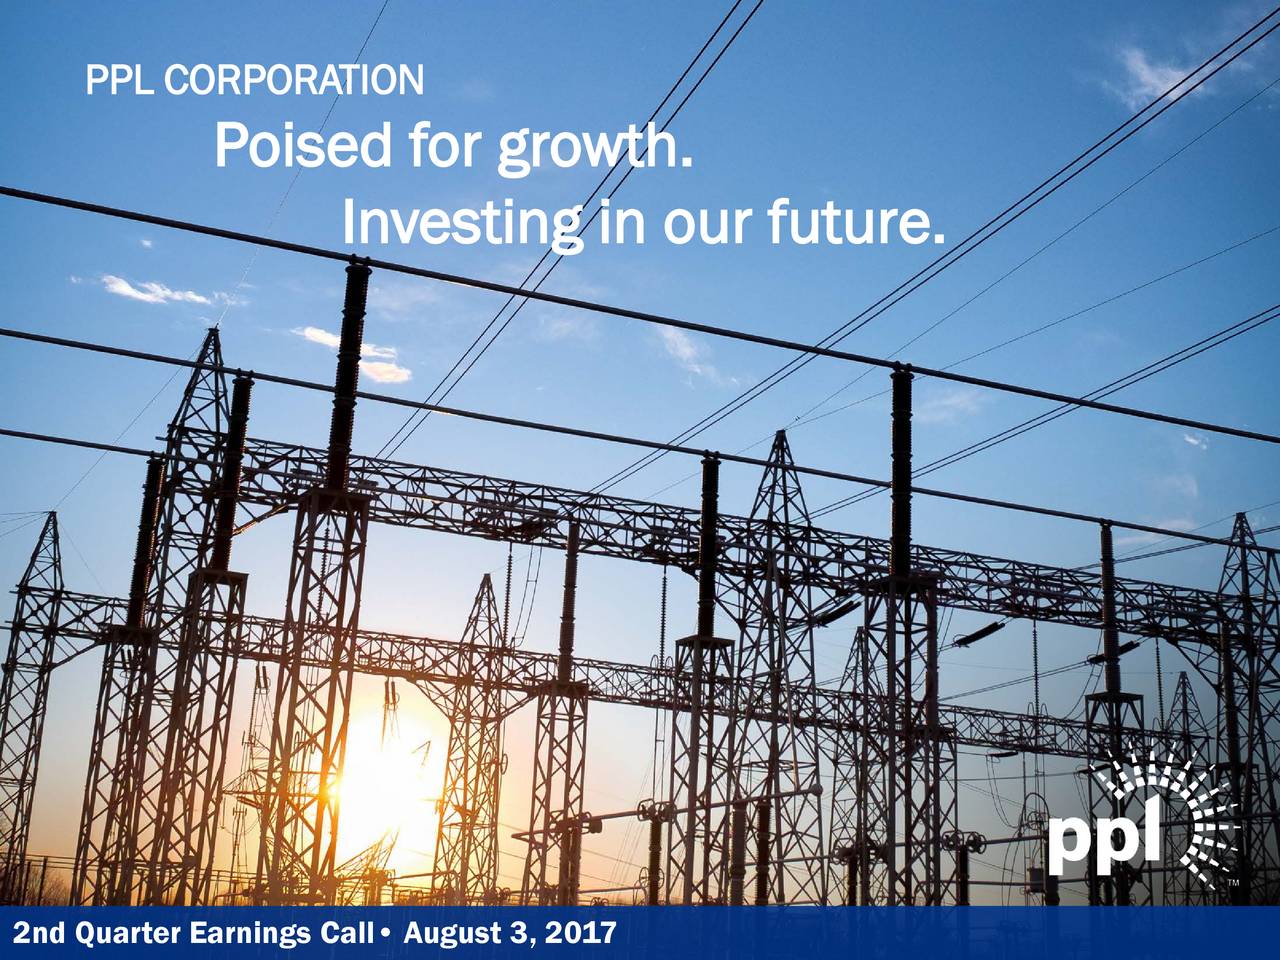 Poised for growth. Investing in our future.